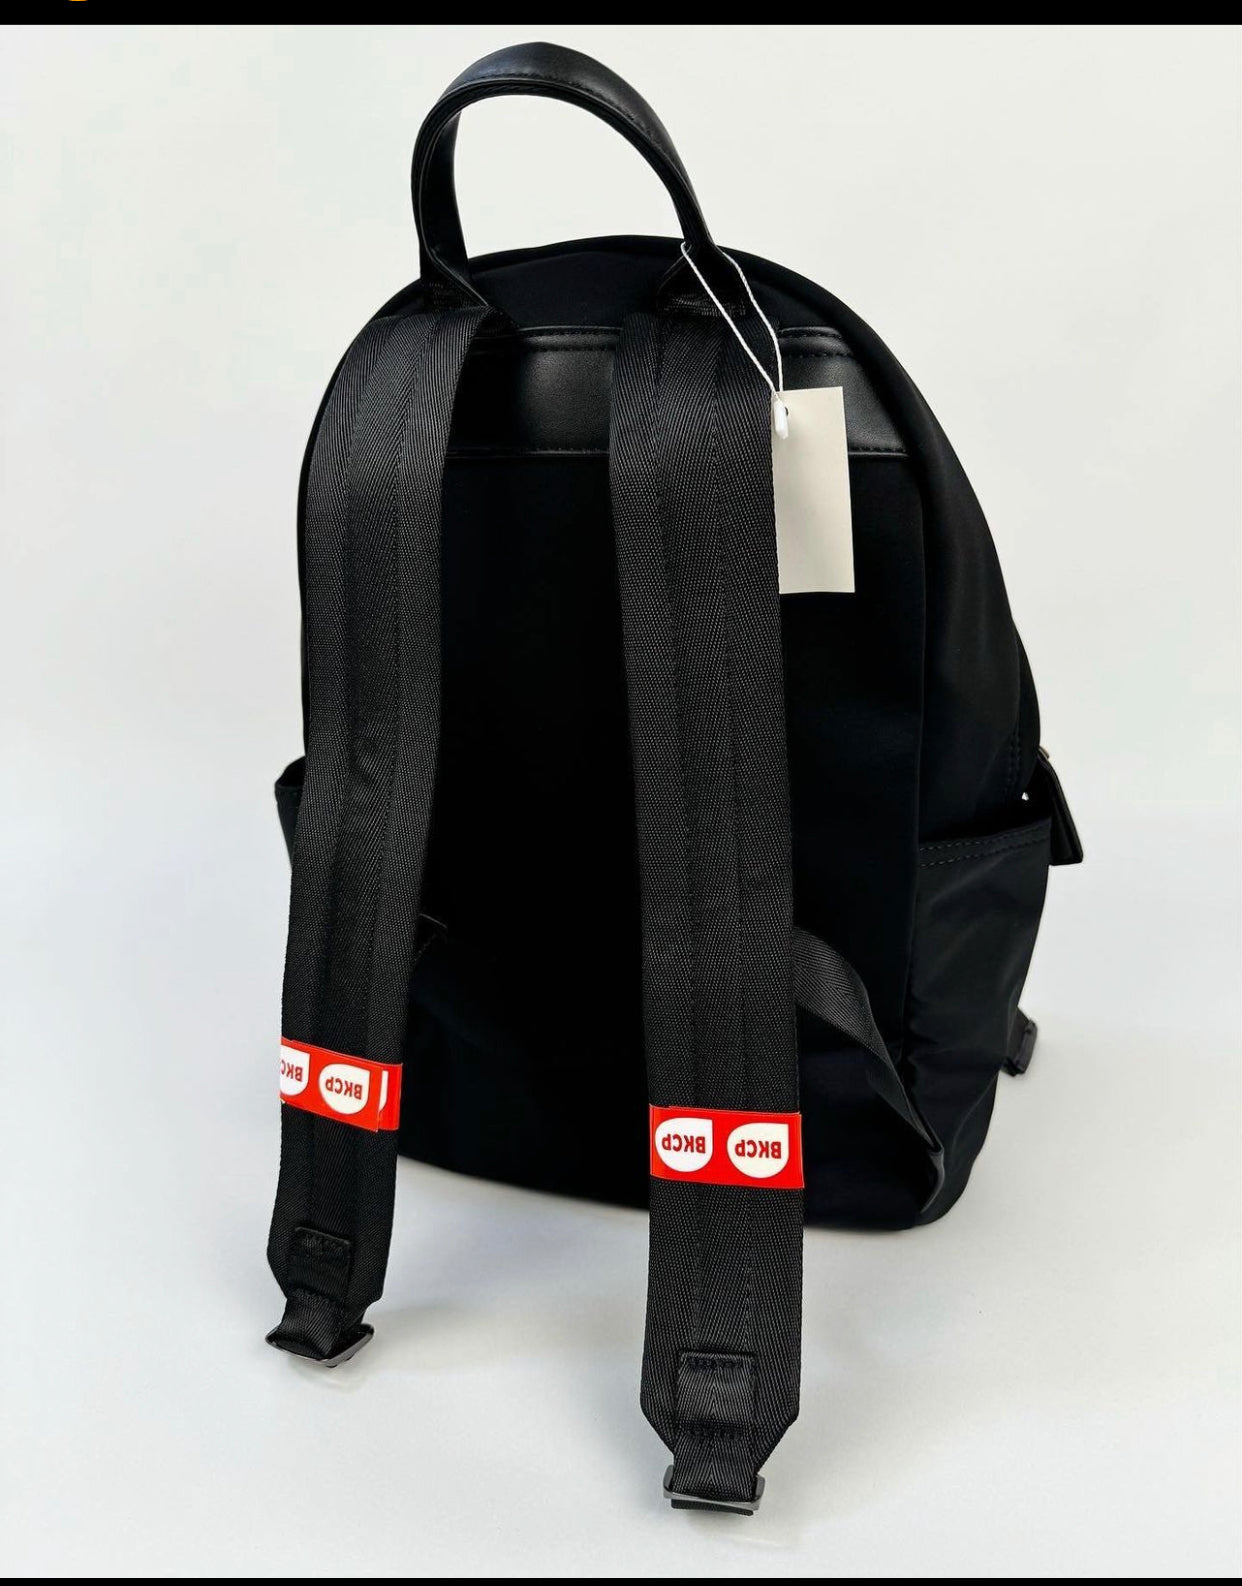 BkCP Expstly backpack ma